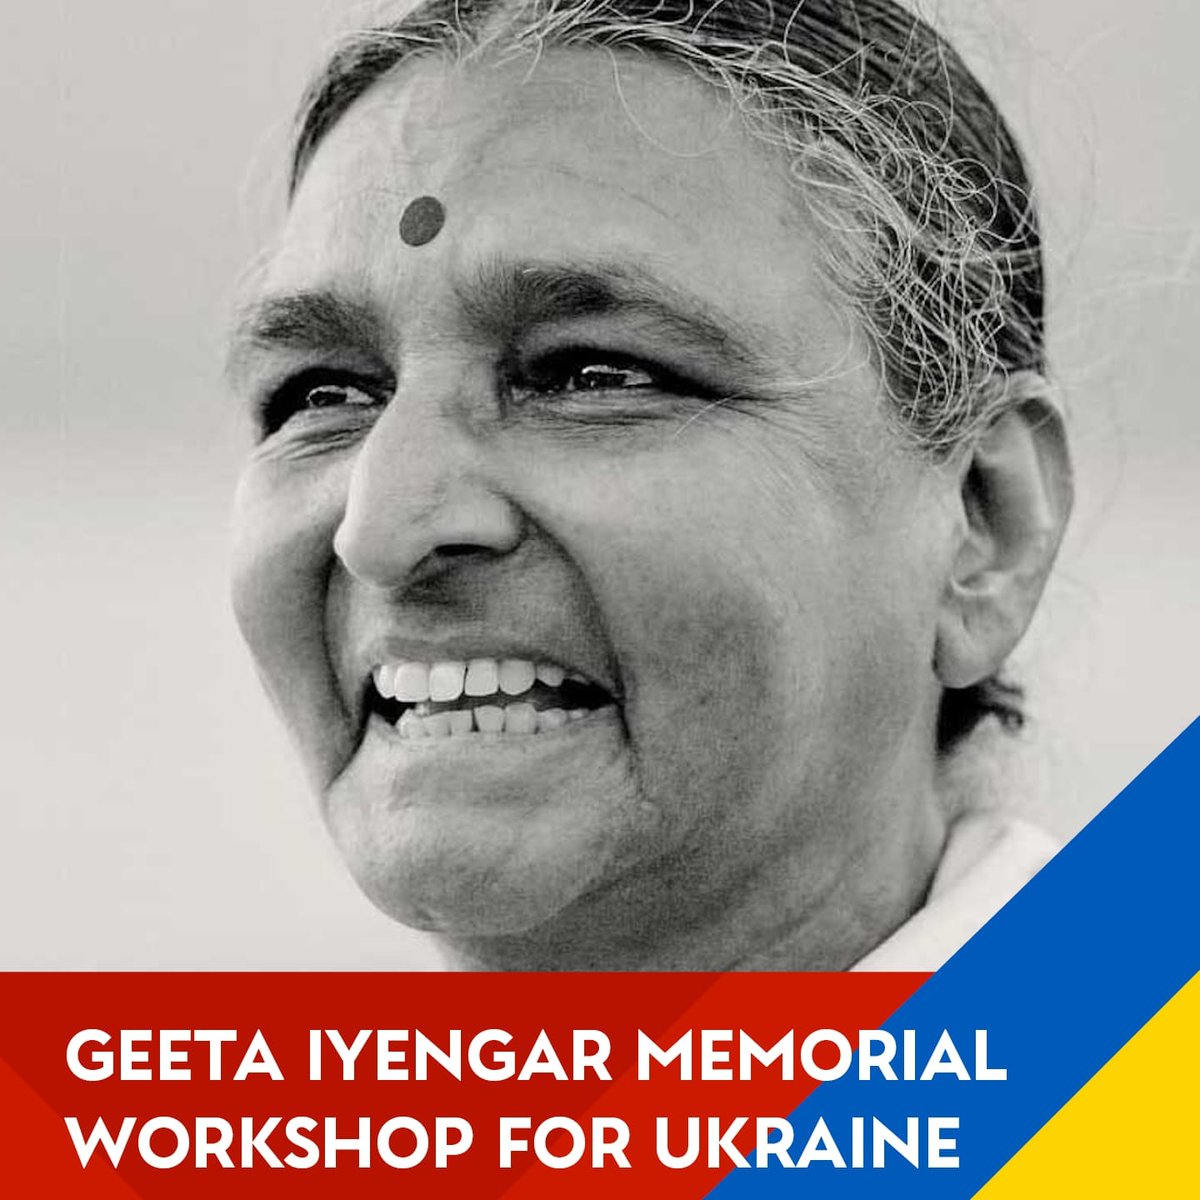 To mark the anniversary of Geetaji’s passing, we are holding a three hour General Level Studio Workshop with Judy Smith on Friday 16 December to raise money for the Disasters and Emergency Committee Ukraine Humanitarian Appeal. We hope you can join us. iyengaryogalondon.co.uk